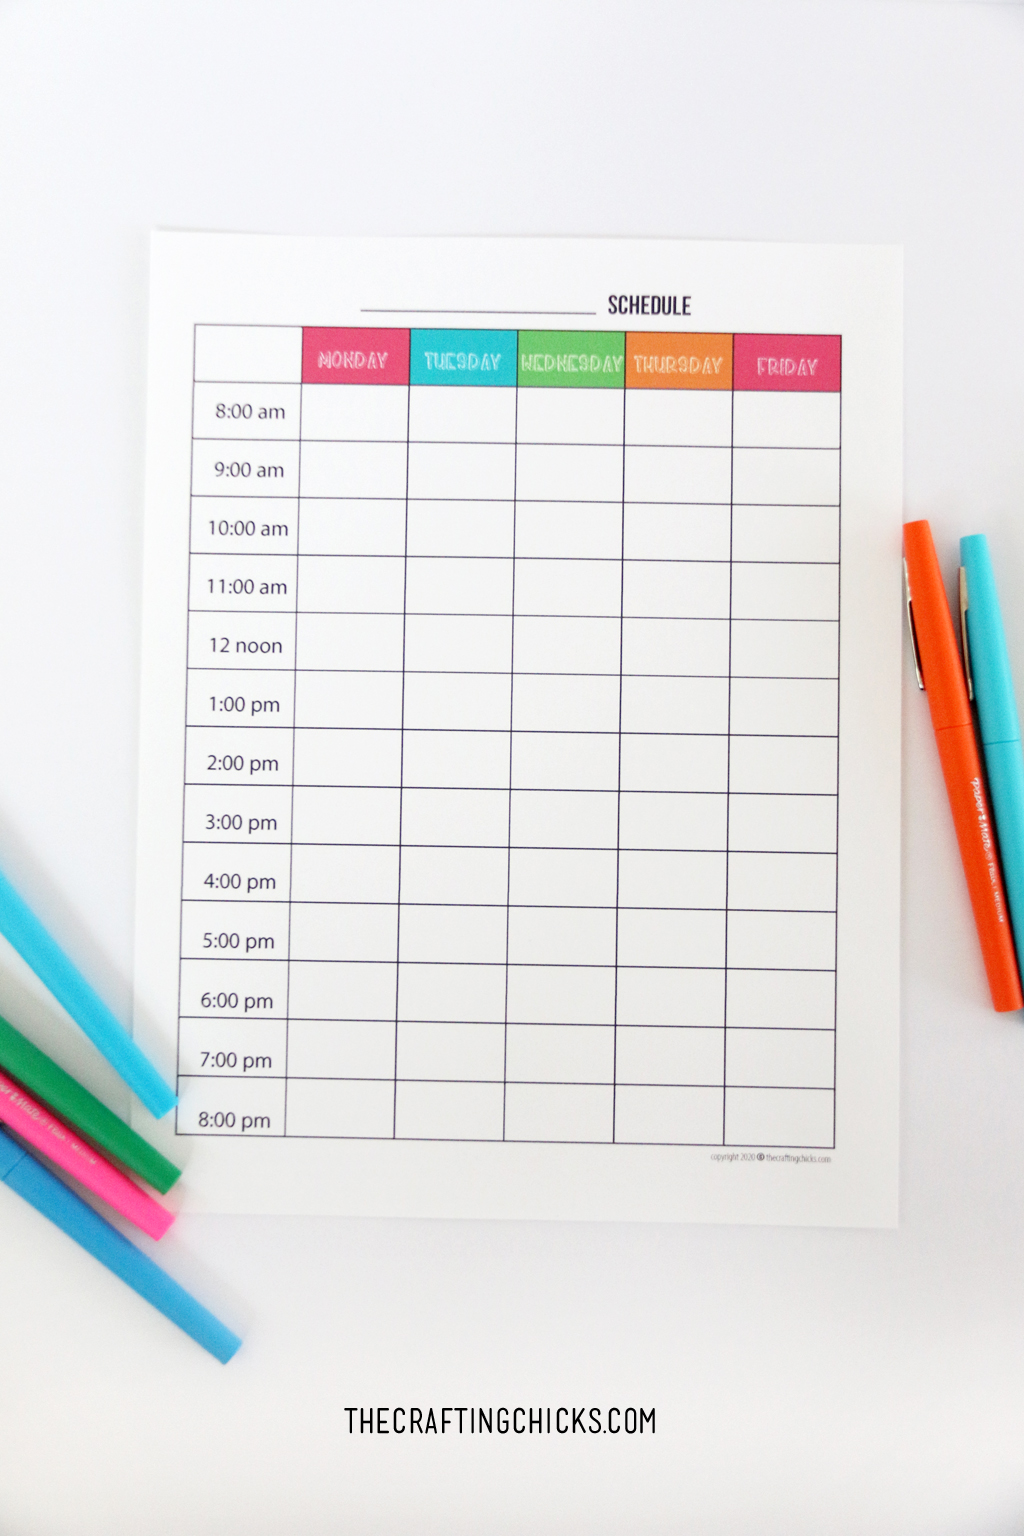 Hourly Weekly Schedule Template from thecraftingchicks.com